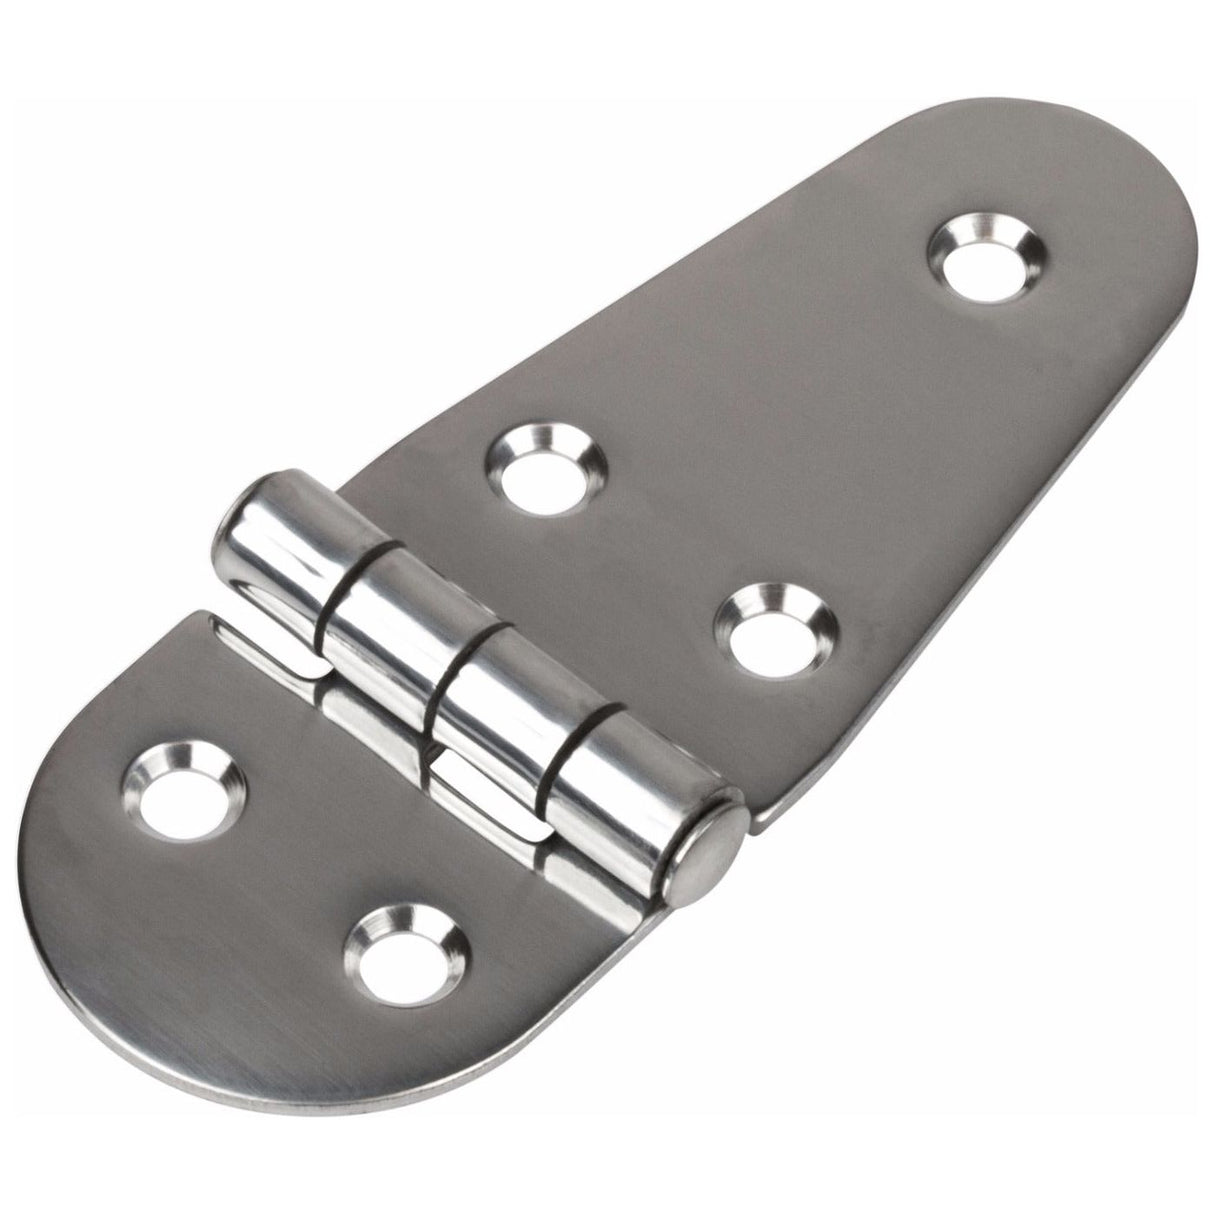 4-1/16" Round Side Stainless Steel Hinge